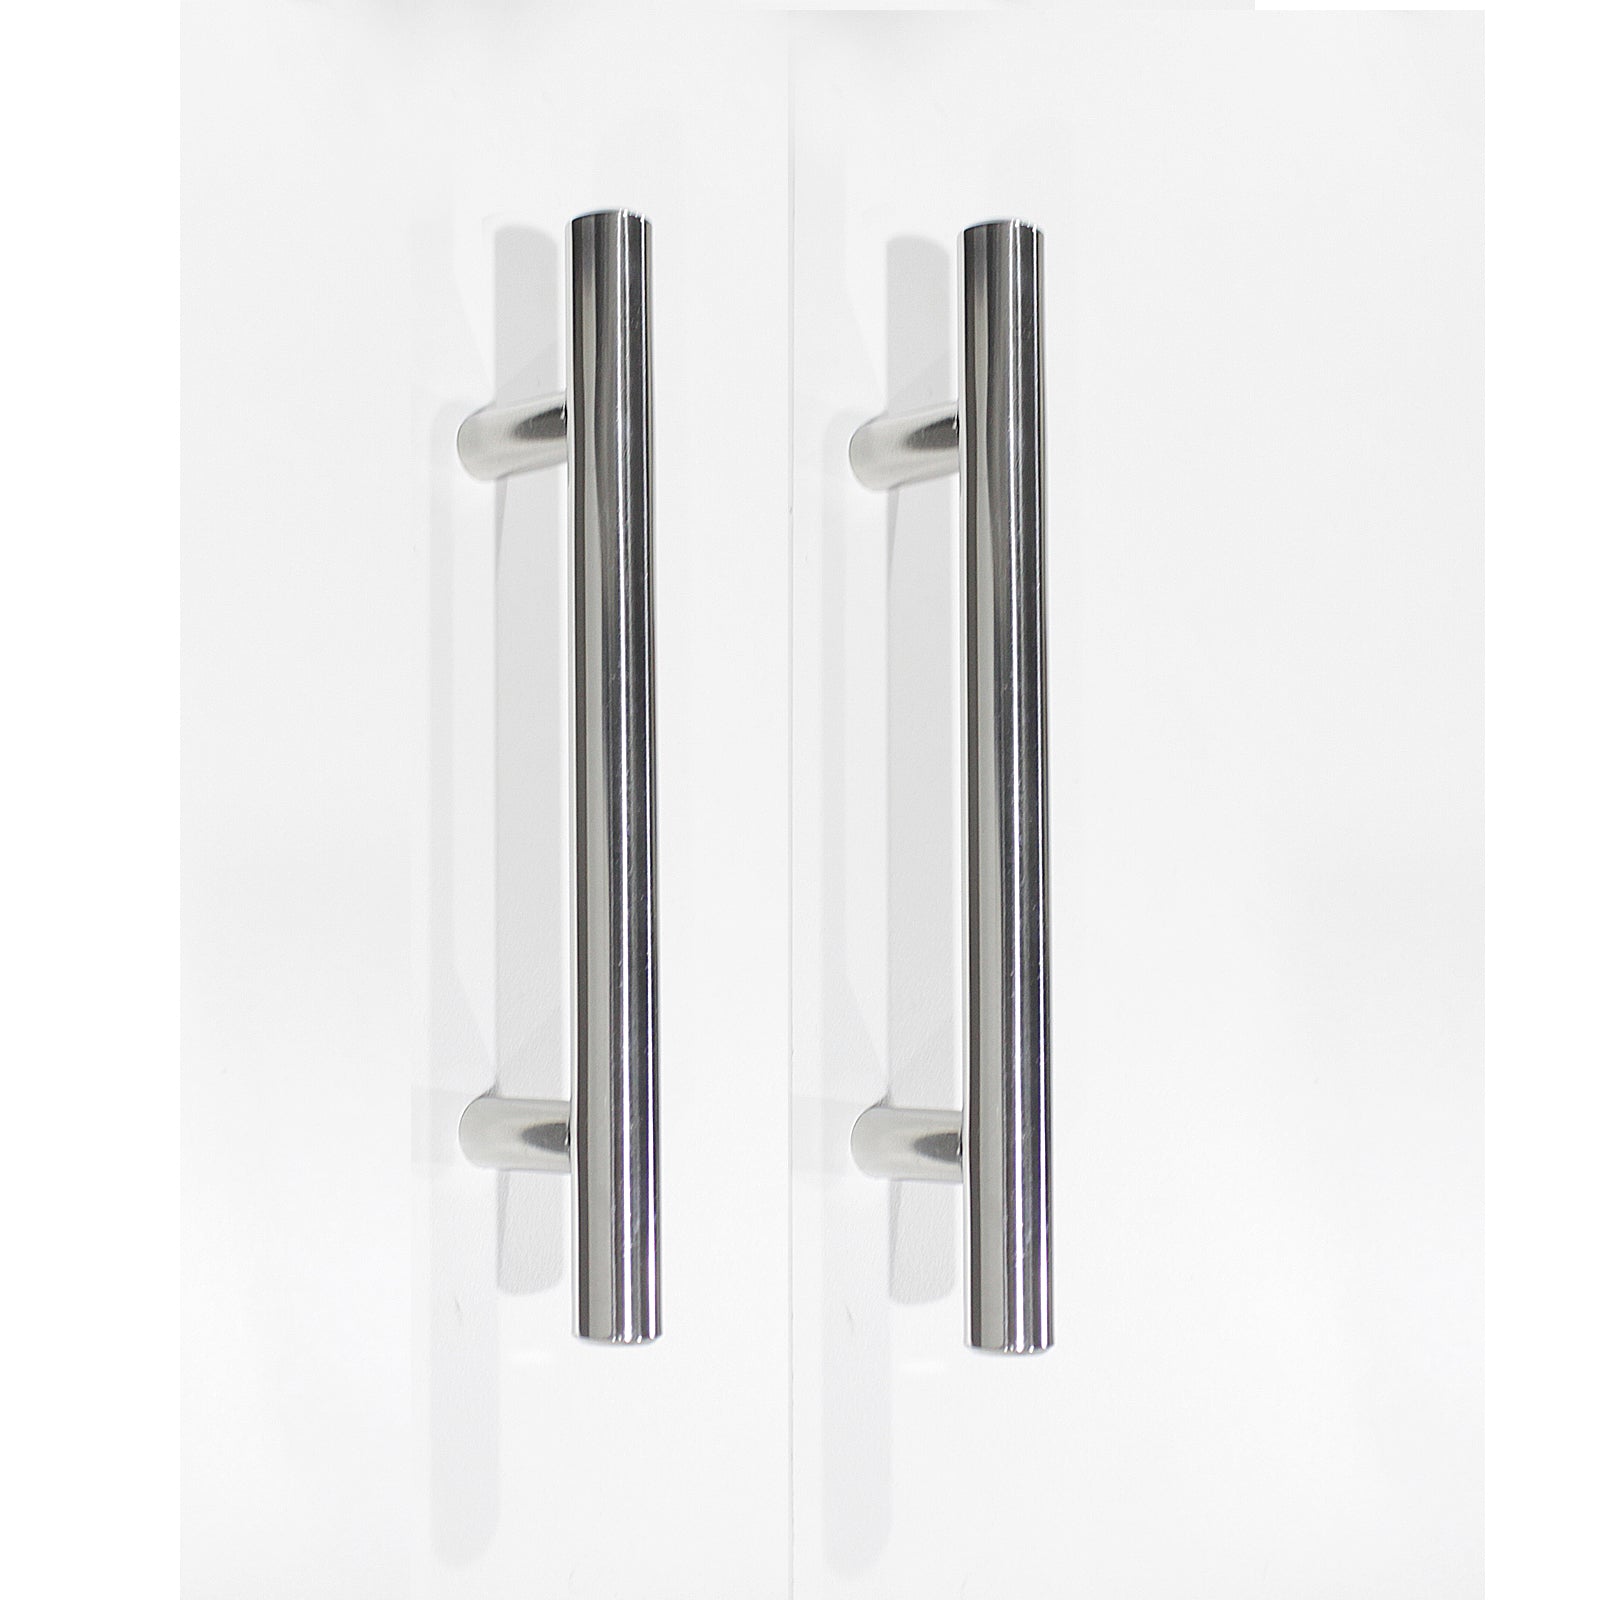 Stainless Steel T Bar Cabinet Handles Polished Chrome Finish, 96mm 3 3/4inch Hole Centers - Probrico